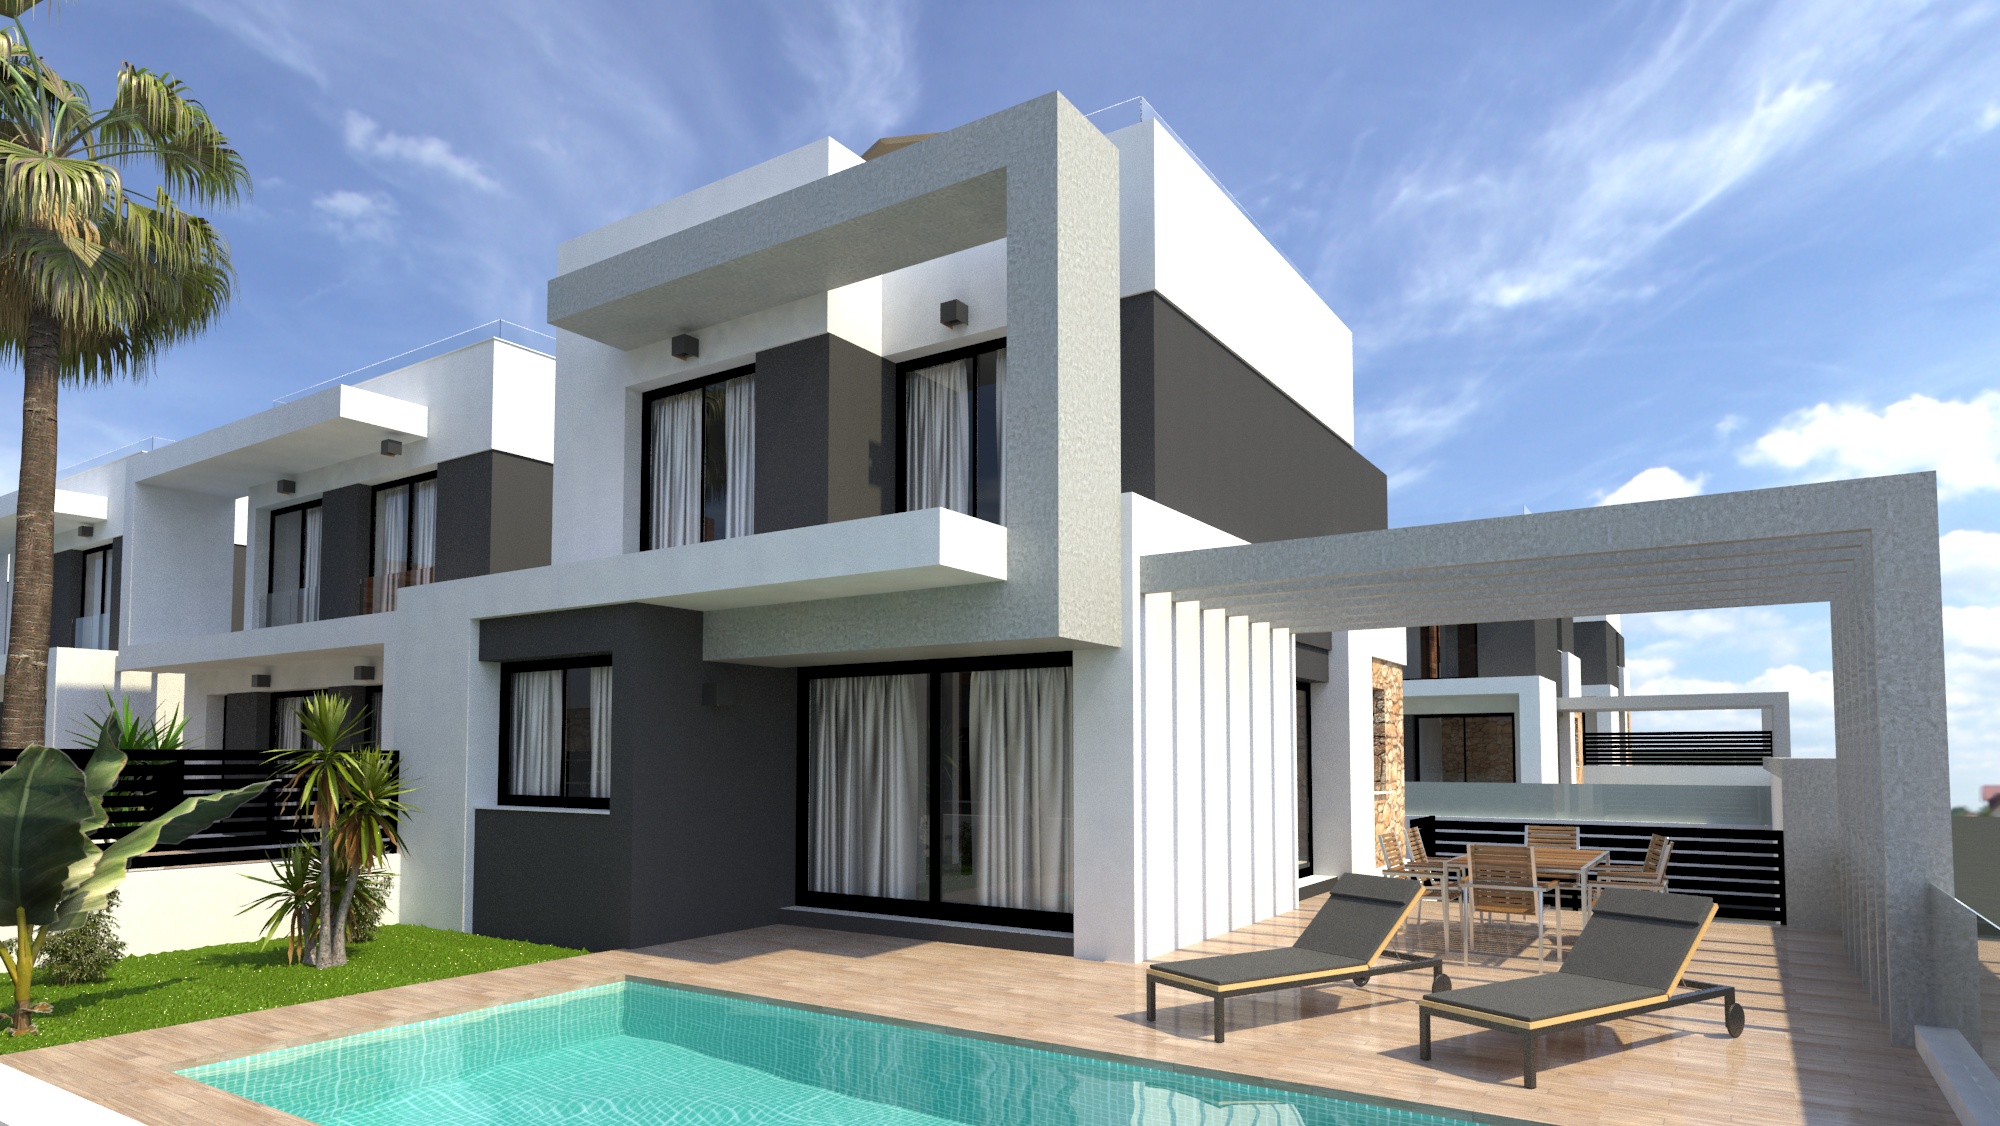 Newly built modern link-detached villas in ideal location.